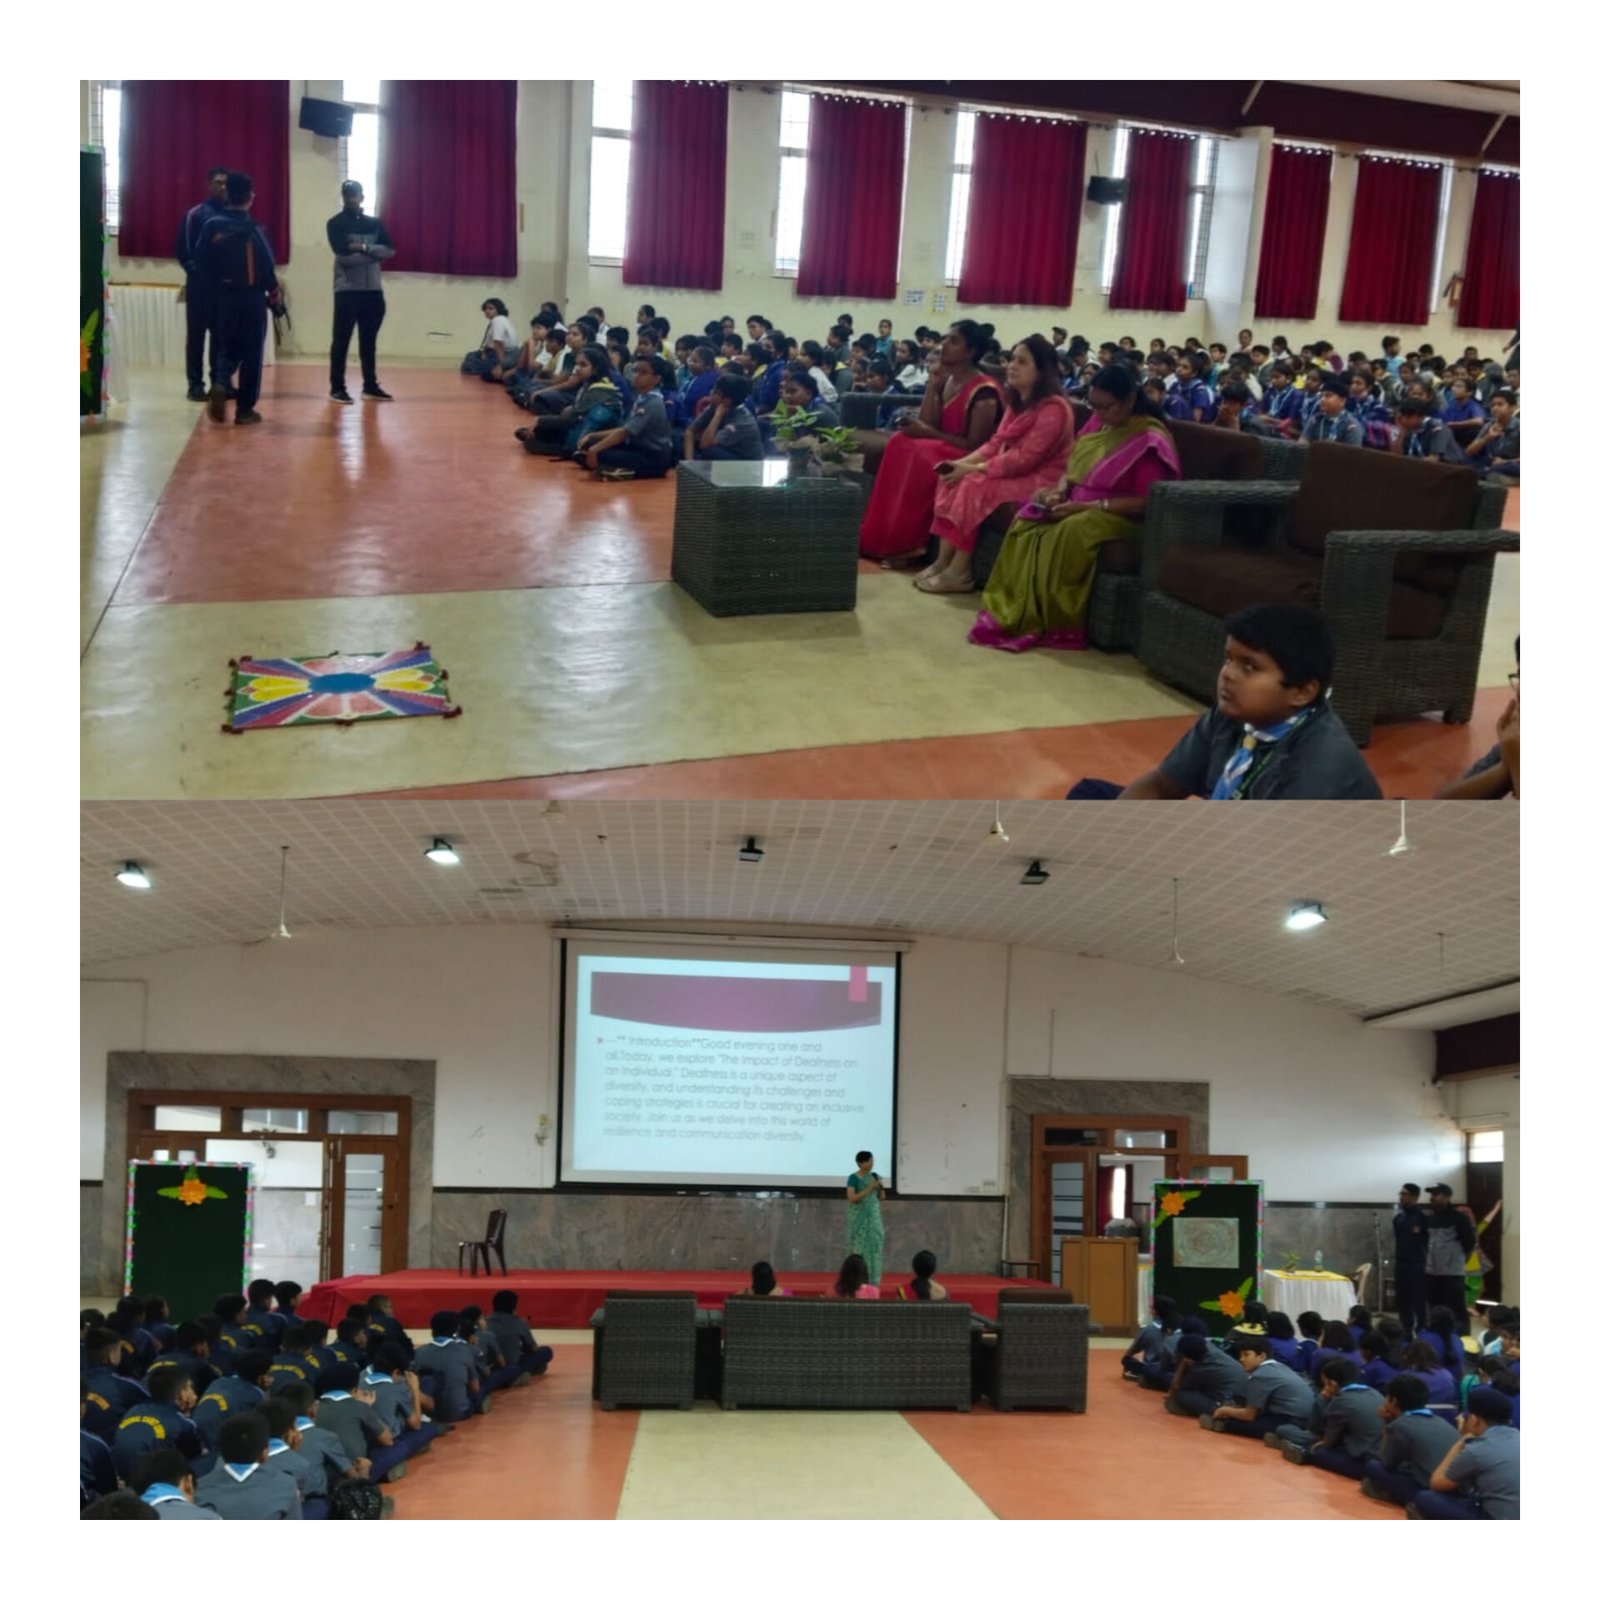 Read more about the article On “Impact of Deafness in Early Childhood” A talk was given to students of Delhi Public School by Ms.Radhika Poovyya and Ms.Cathy Charles